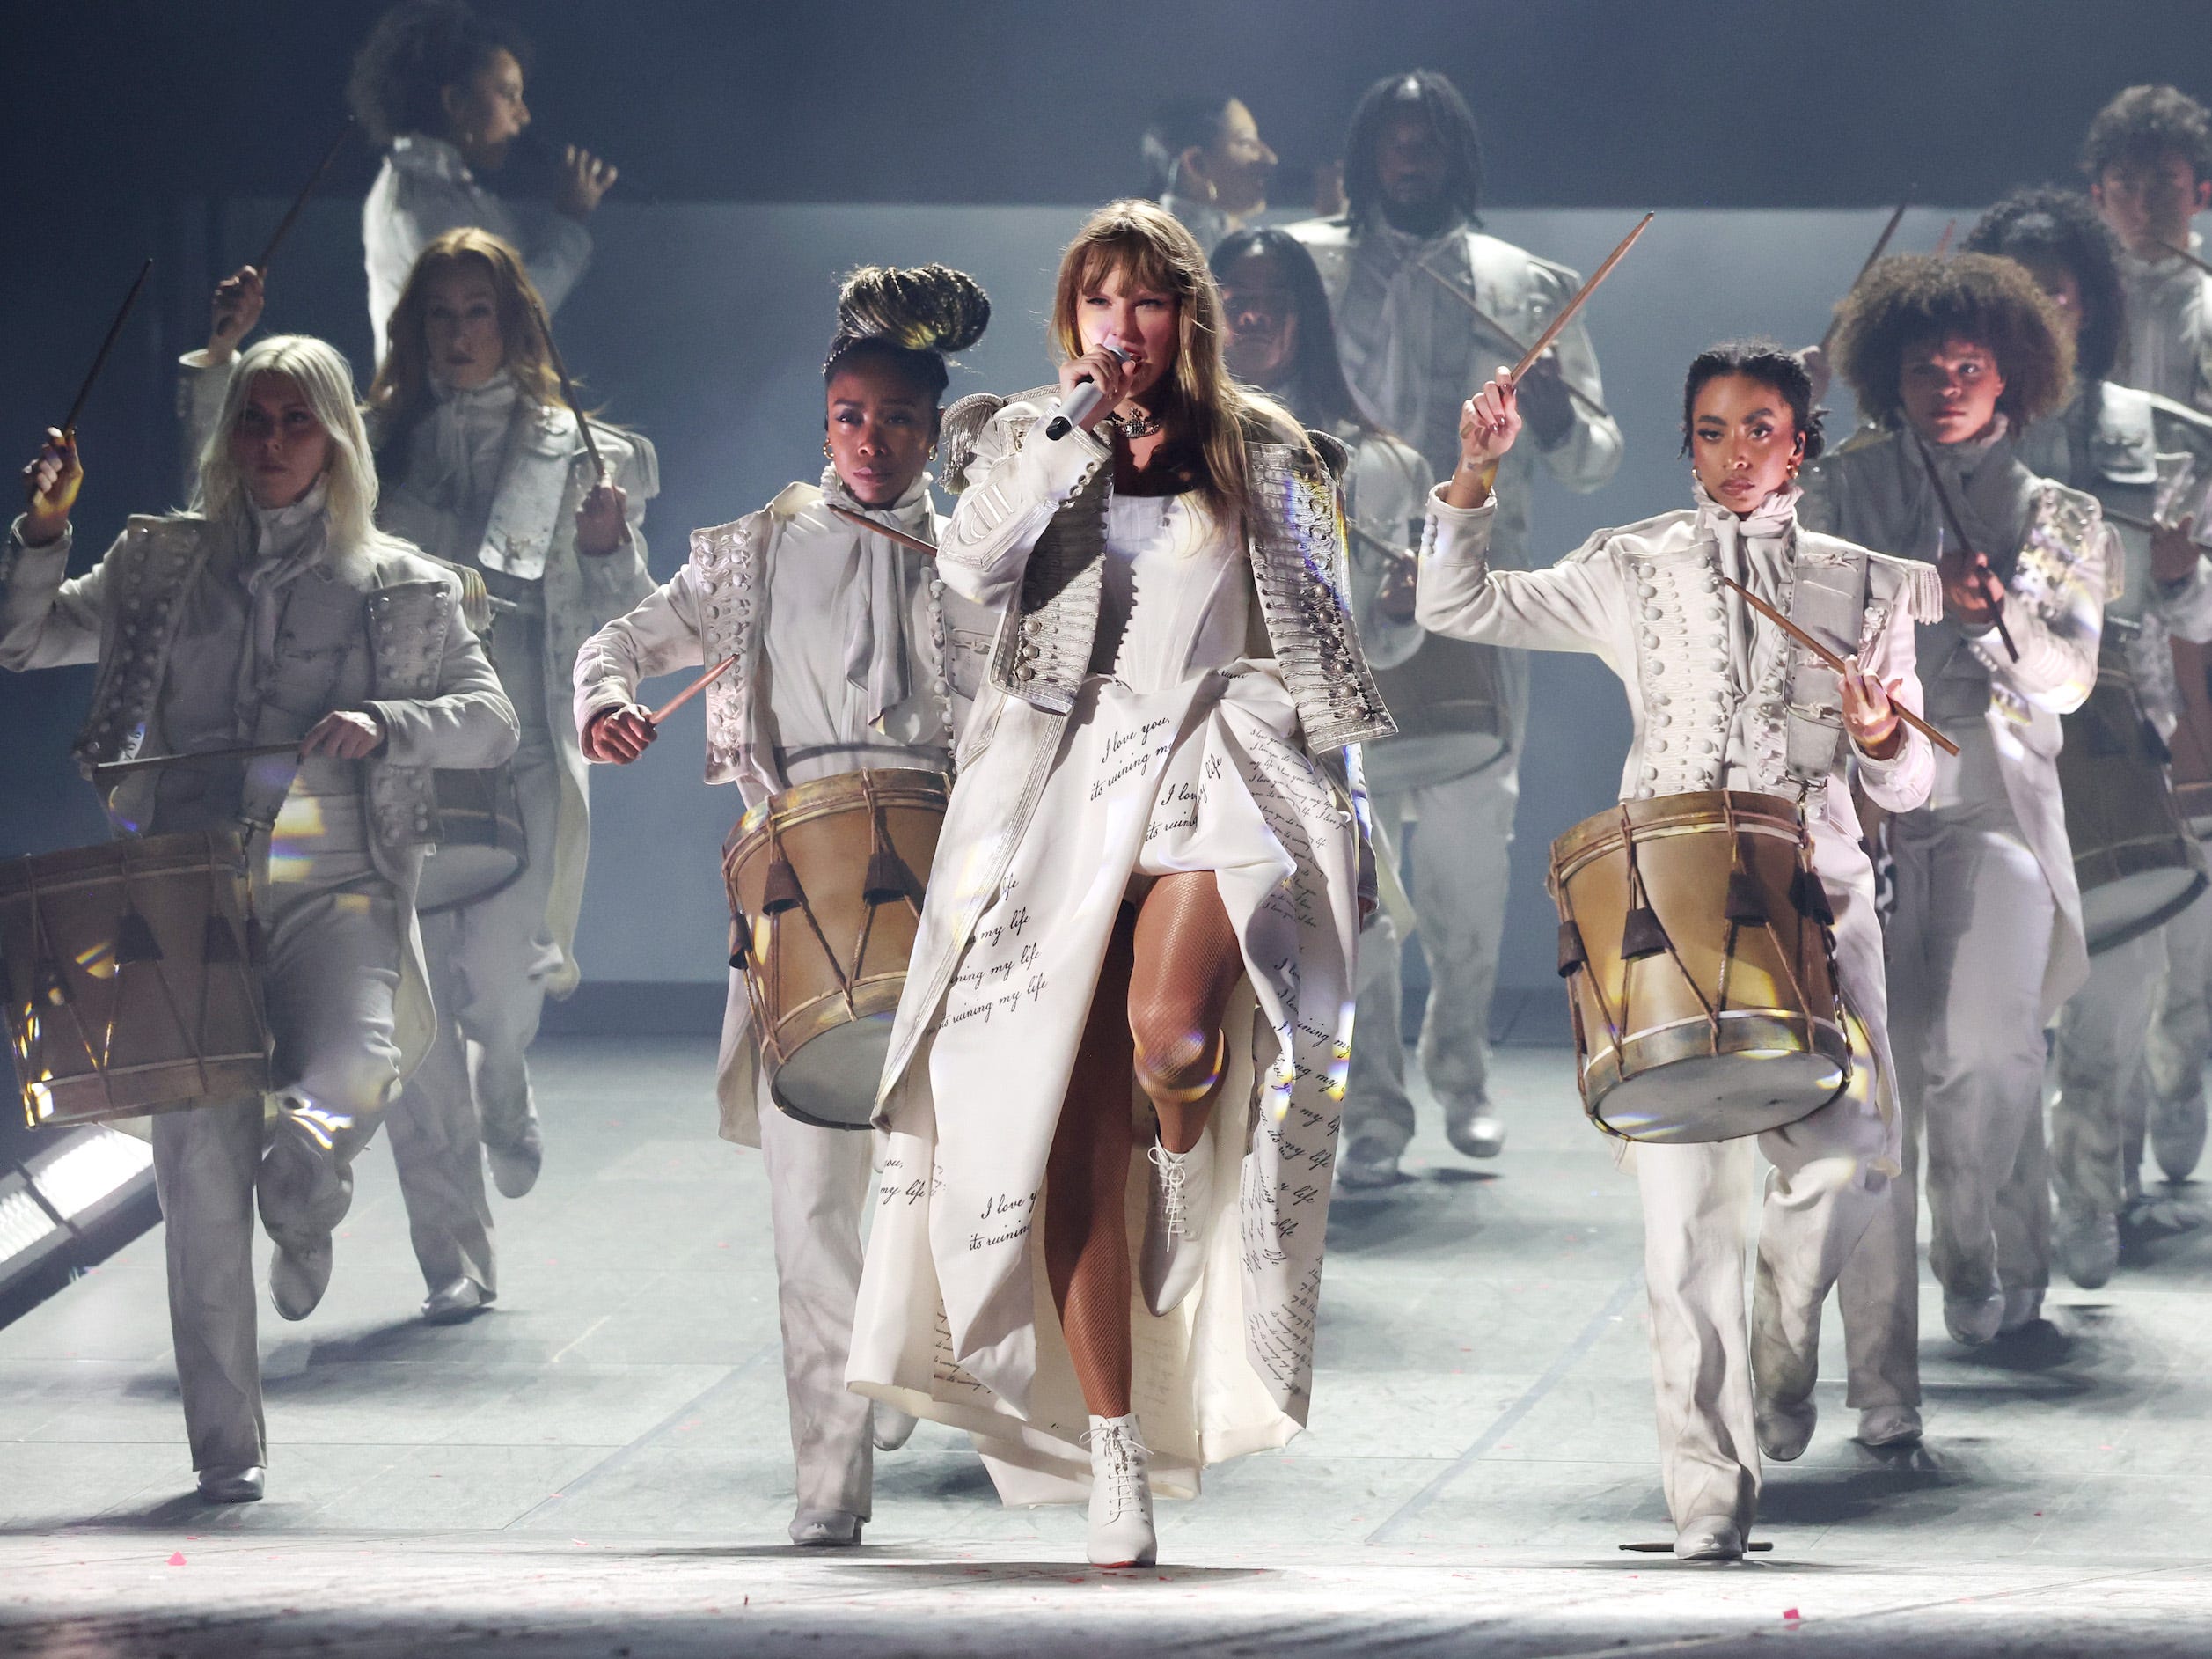 <p>Swift adds a military jacket atop her "Tortured Poets" gown to sing "The Smallest Man Who Ever Lived," an impassioned performance that casts Swift as the drum major in a marching band. The look is still a little corny, but at least it's a full embrace of the theatrical costume vibe.</p>